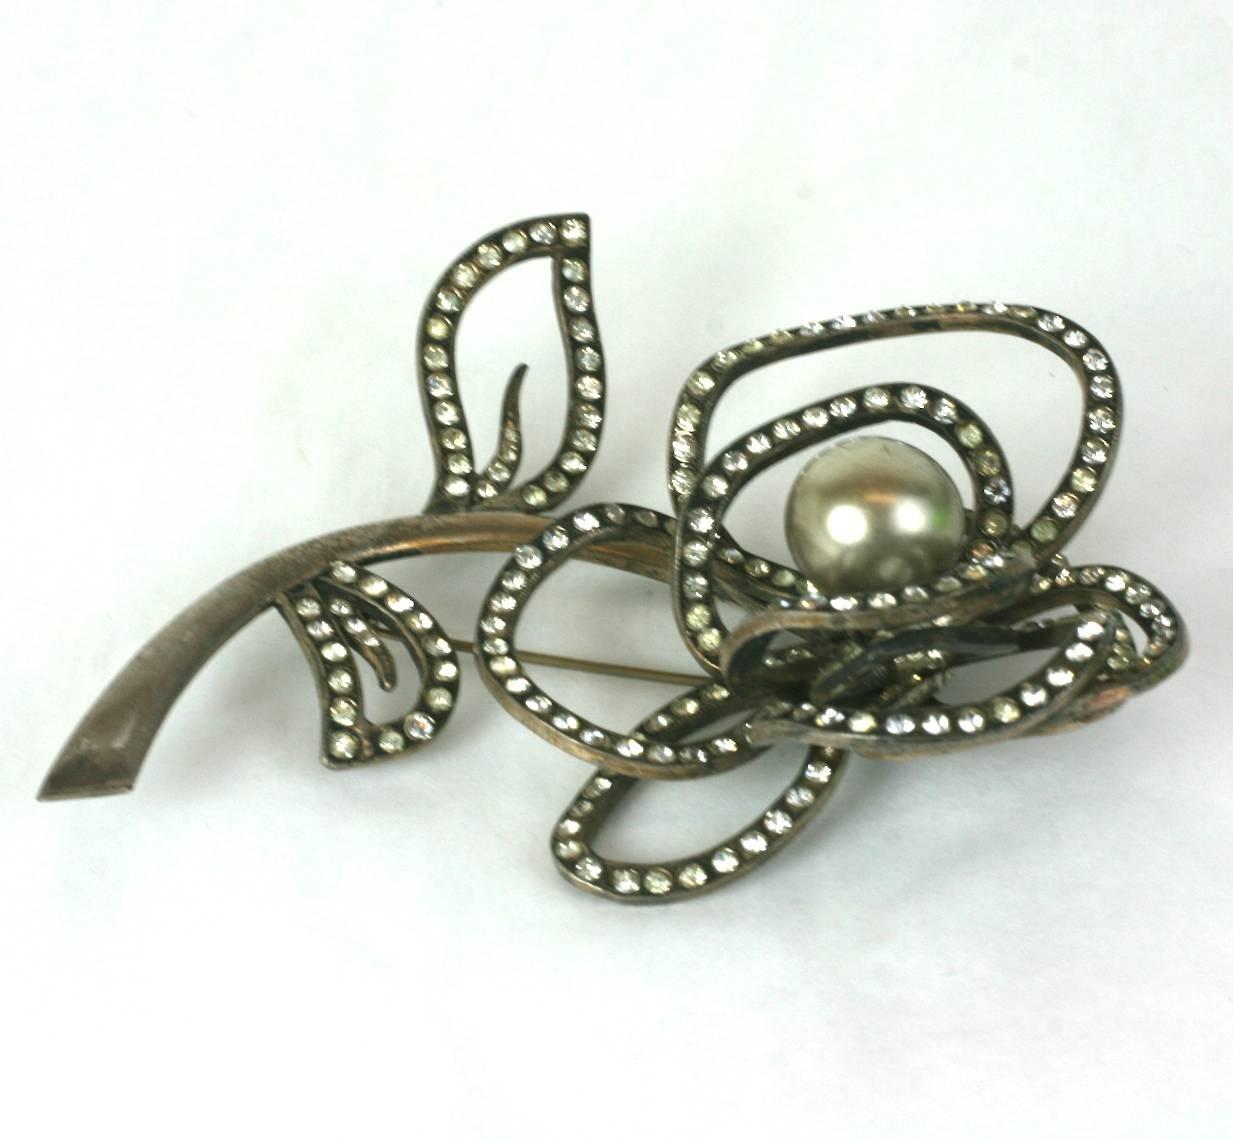 Massive,Roger Jean Pierre dimensional French abstract rose brooch of silver gilt metal, hand set crystal pave and focal faux silvered pearl. 1950's France. Excellent Condition. 
Marked Depose. 
4.50